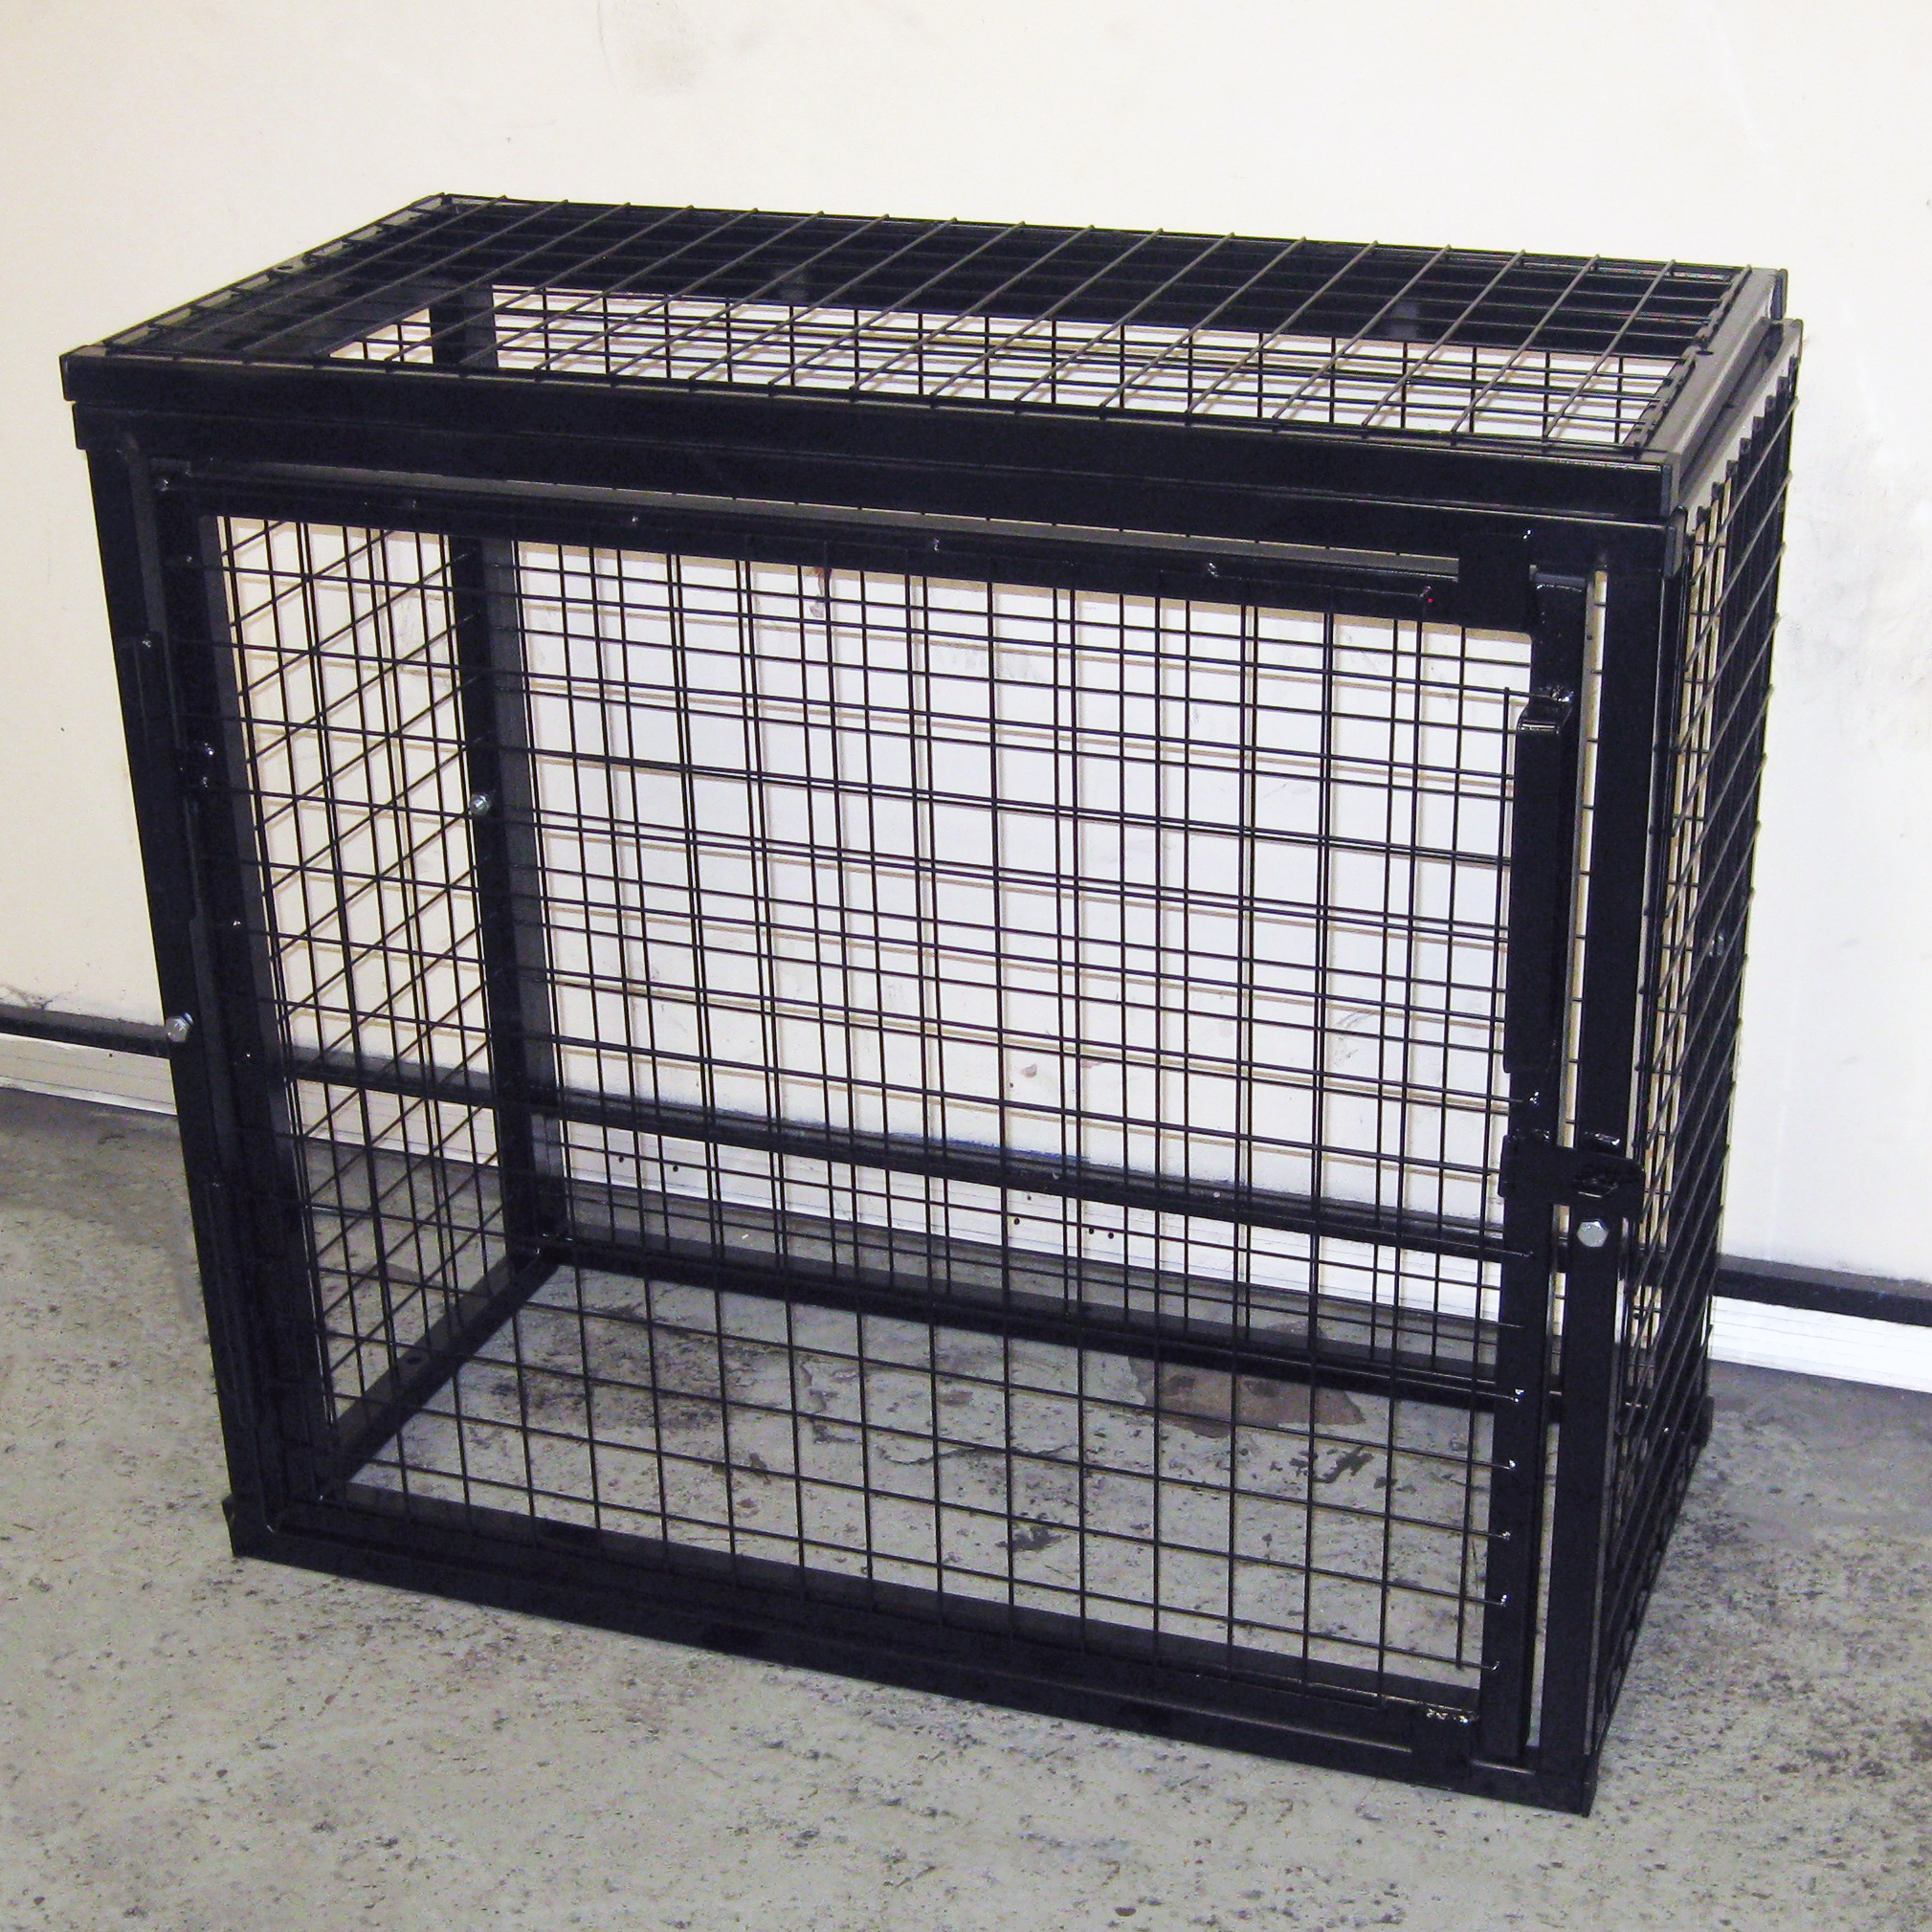 Bespoke Cage – Small Up to 1.5m